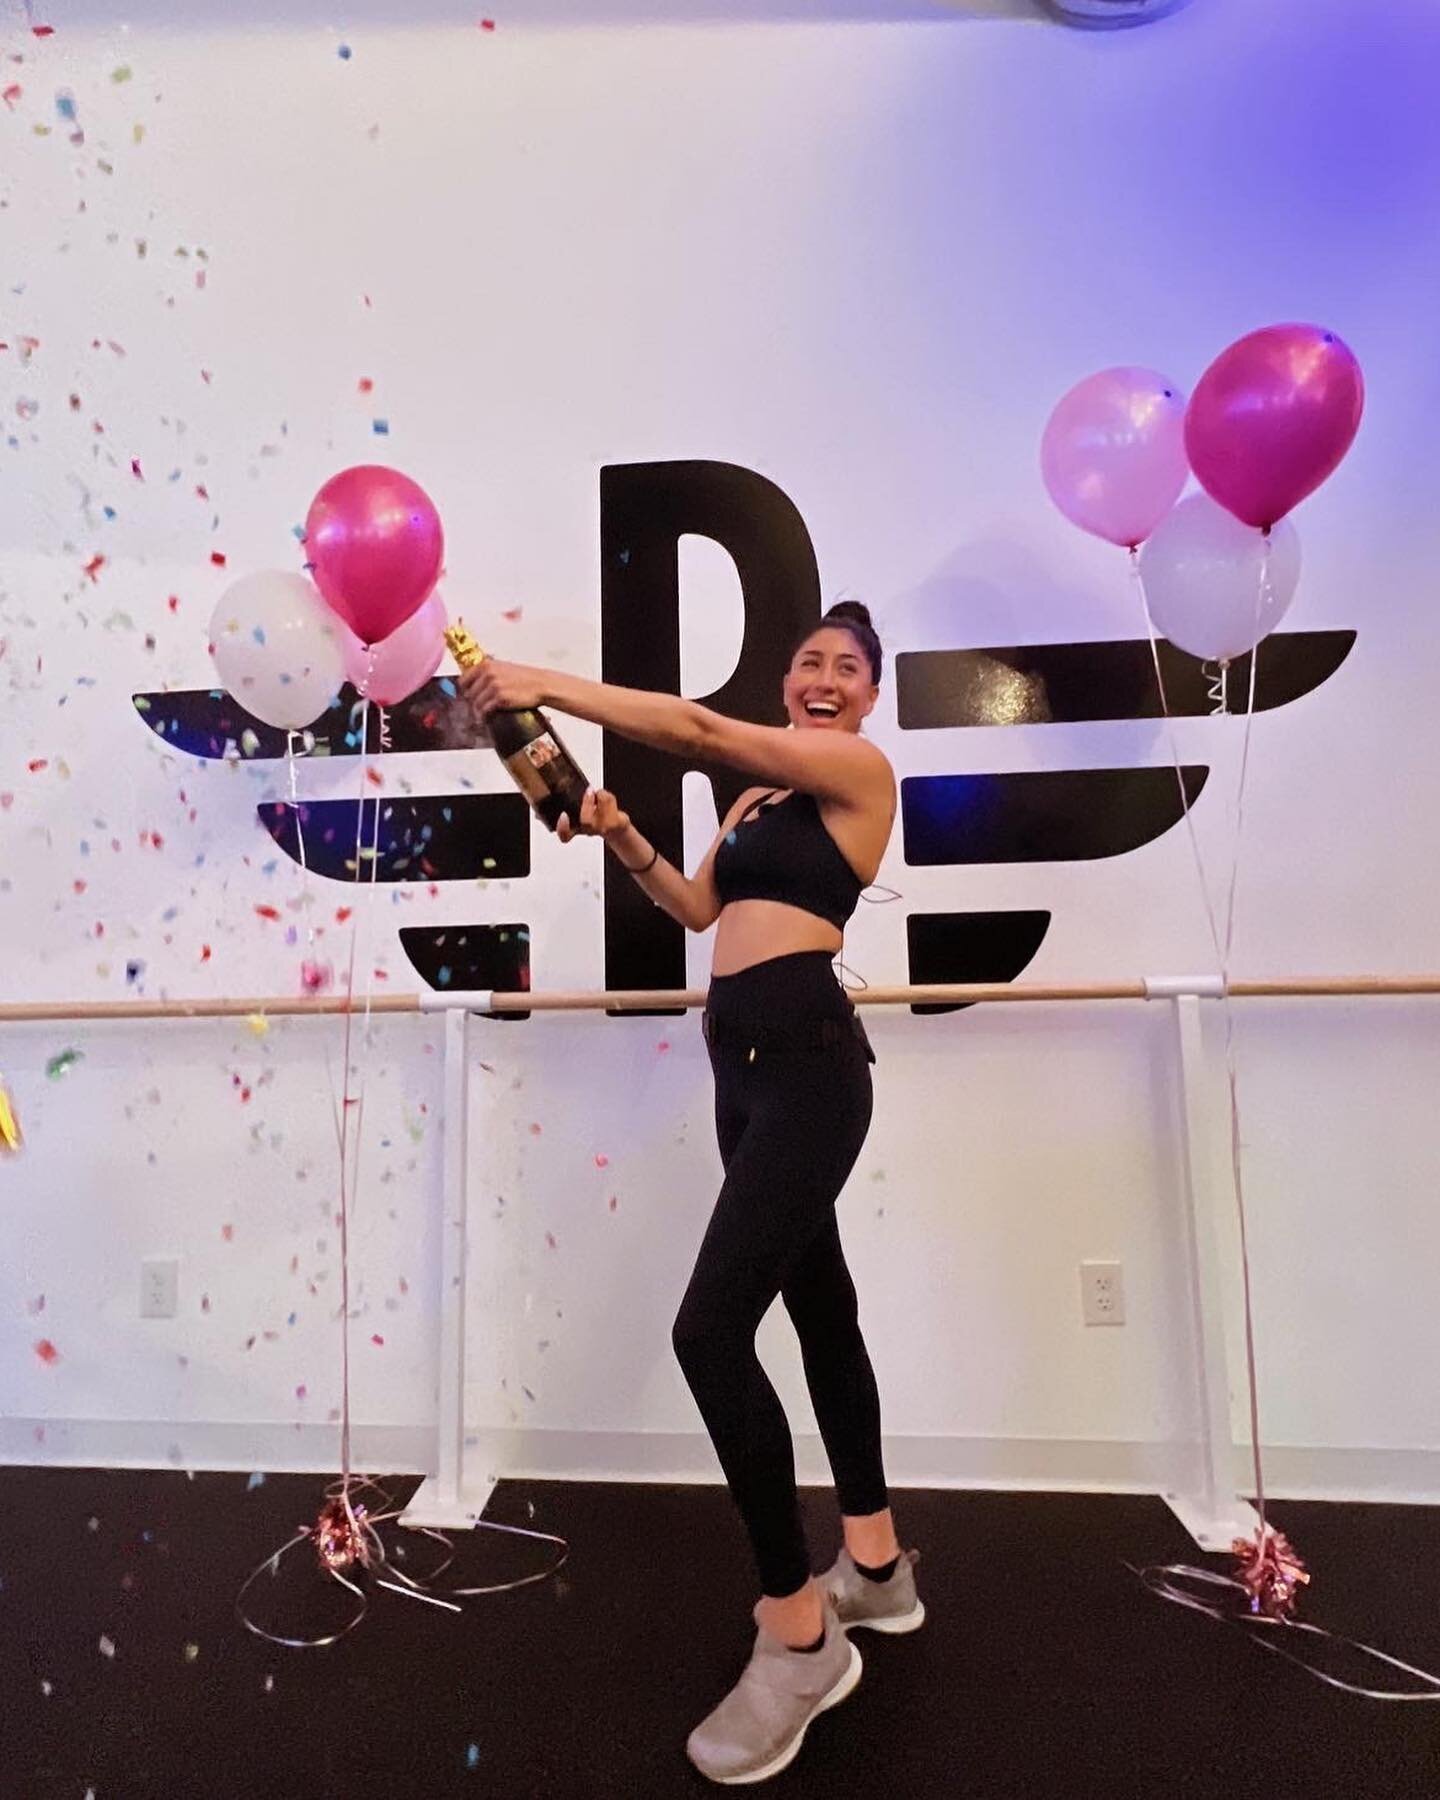 GABBY&rsquo;S SENDOFF&hellip;cheers to a new journey and new adventure ahead of you! You were with us for only a year but you gave us that high energy and bomb playlists that all left us with a huge impact! We can&rsquo;t wait to see you flourish in 